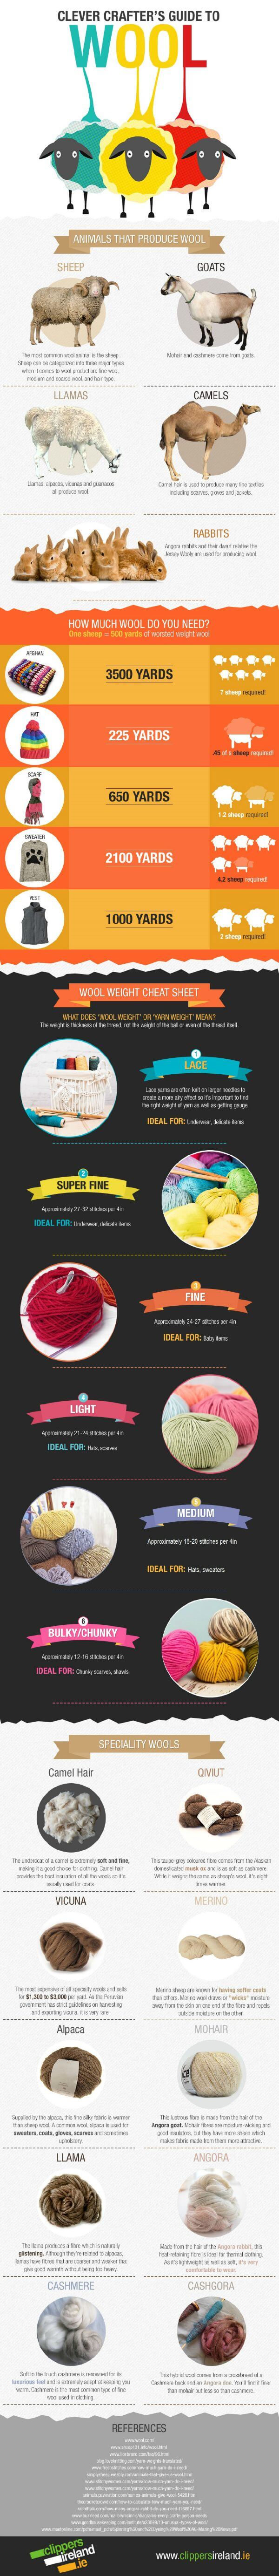 A Clever Crafter’s Guide to Wool | www.petalstopicots.com | #crochet #knit #yarn #wool #fiber